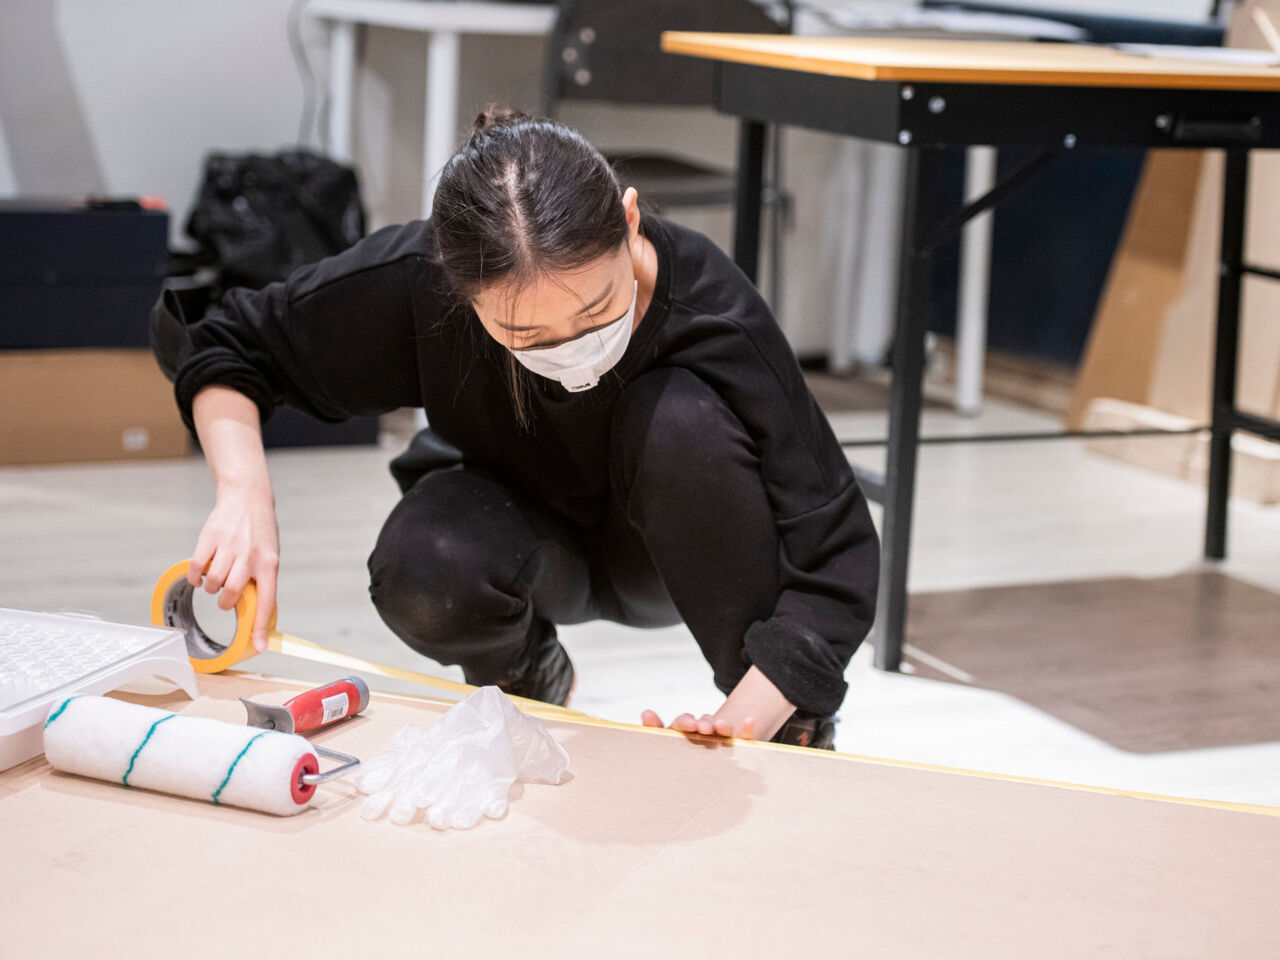 A competitor from Kazakhstan prepares a board for painting with protective tape as part of the Visual Merchandising competition which took place from 14 to 17 October 2022 in Stockholm, Sweden.
